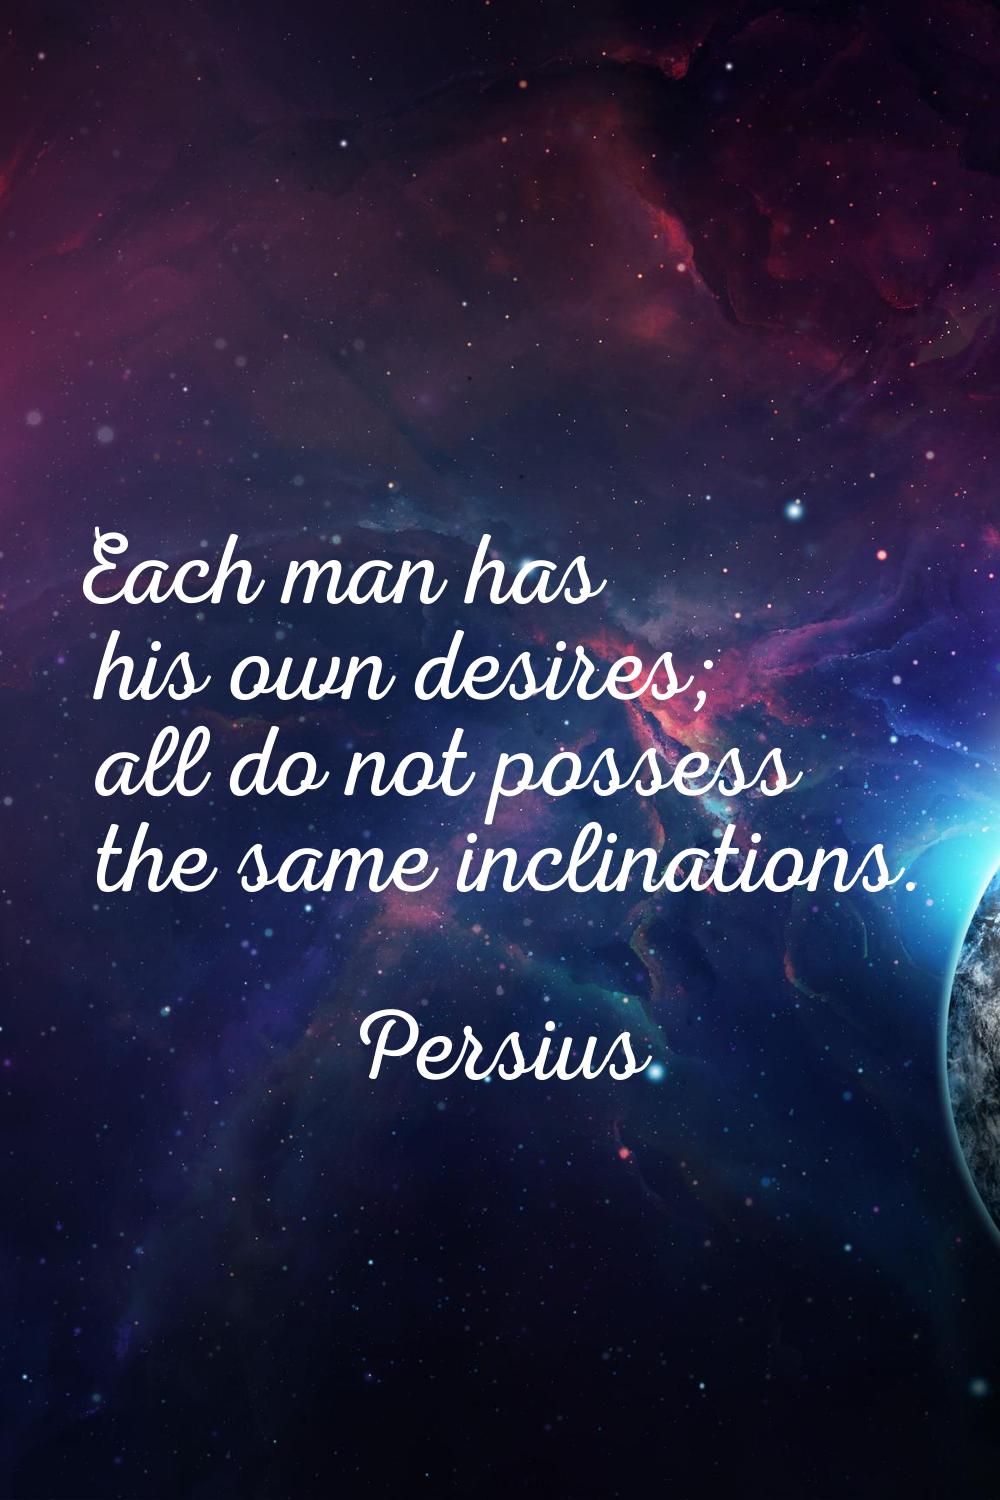 Each man has his own desires; all do not possess the same inclinations.